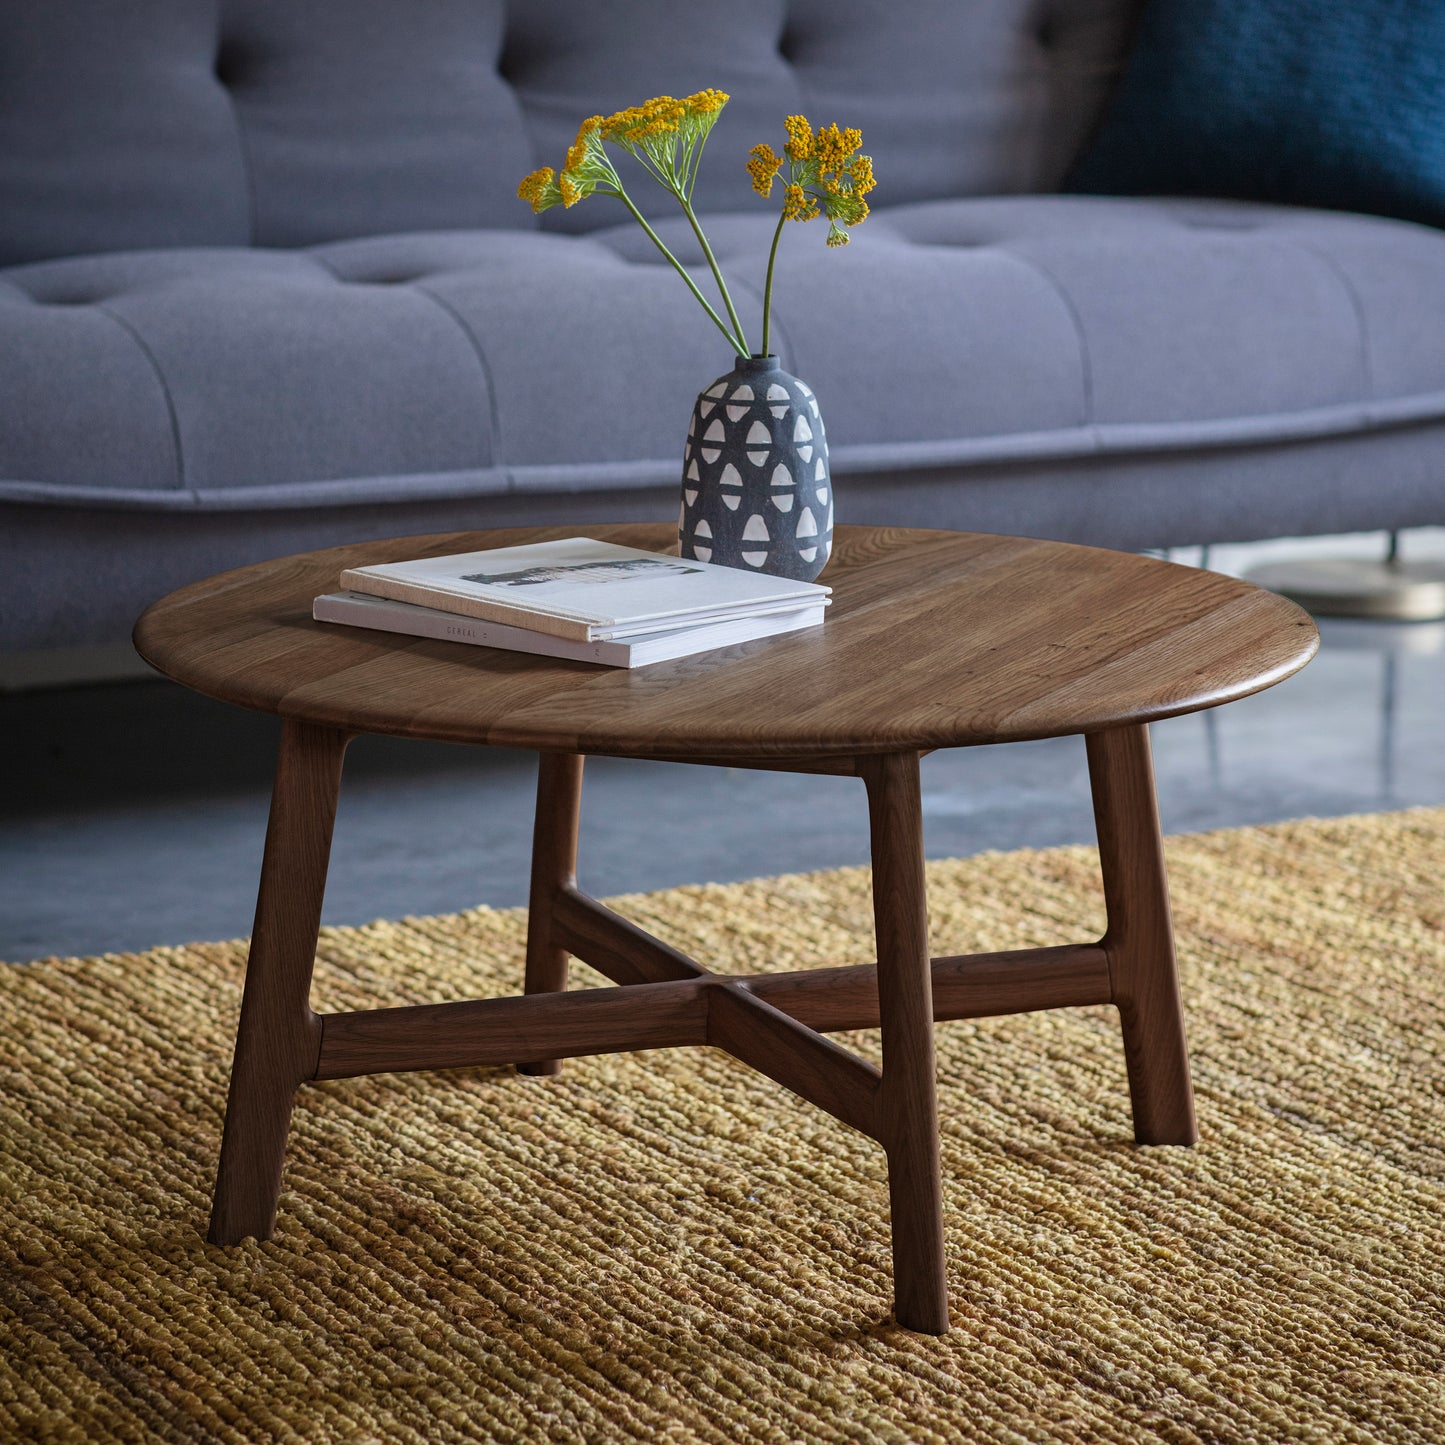 A Walnut Coffee Table from Kikiathome.co.uk, complementing home furniture and interior décor.